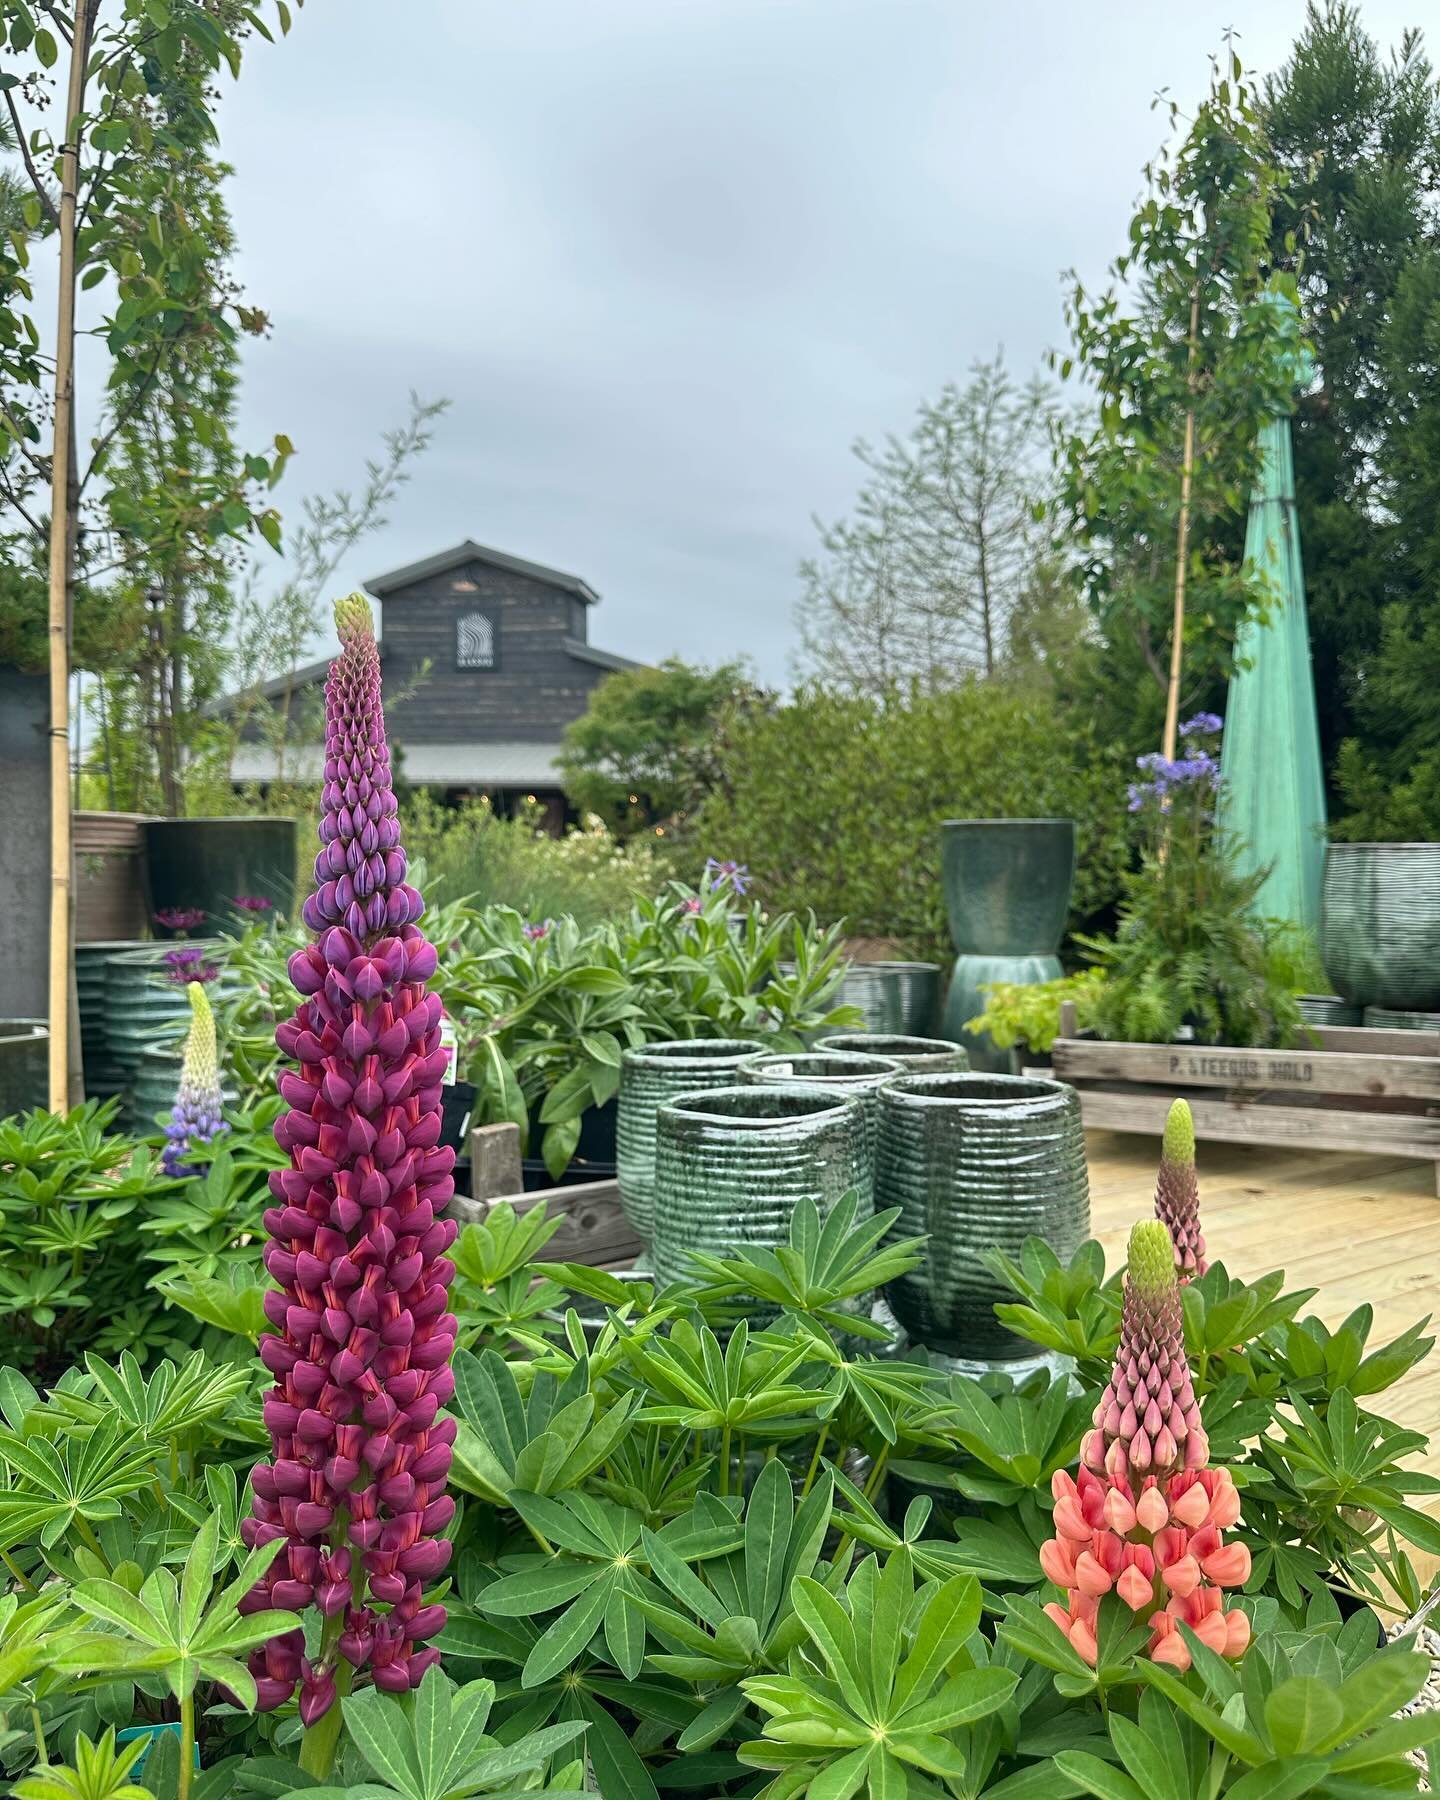 Visit our sublime oasis this weekend. 🪴 Cloudy skies aren&rsquo;t enough to keep us from strolling through the garden center, but we have so much for you to see inside the shop too. 

The bar and coffee shop are open all weekend!

SATURDAY 5/4
🌮 We